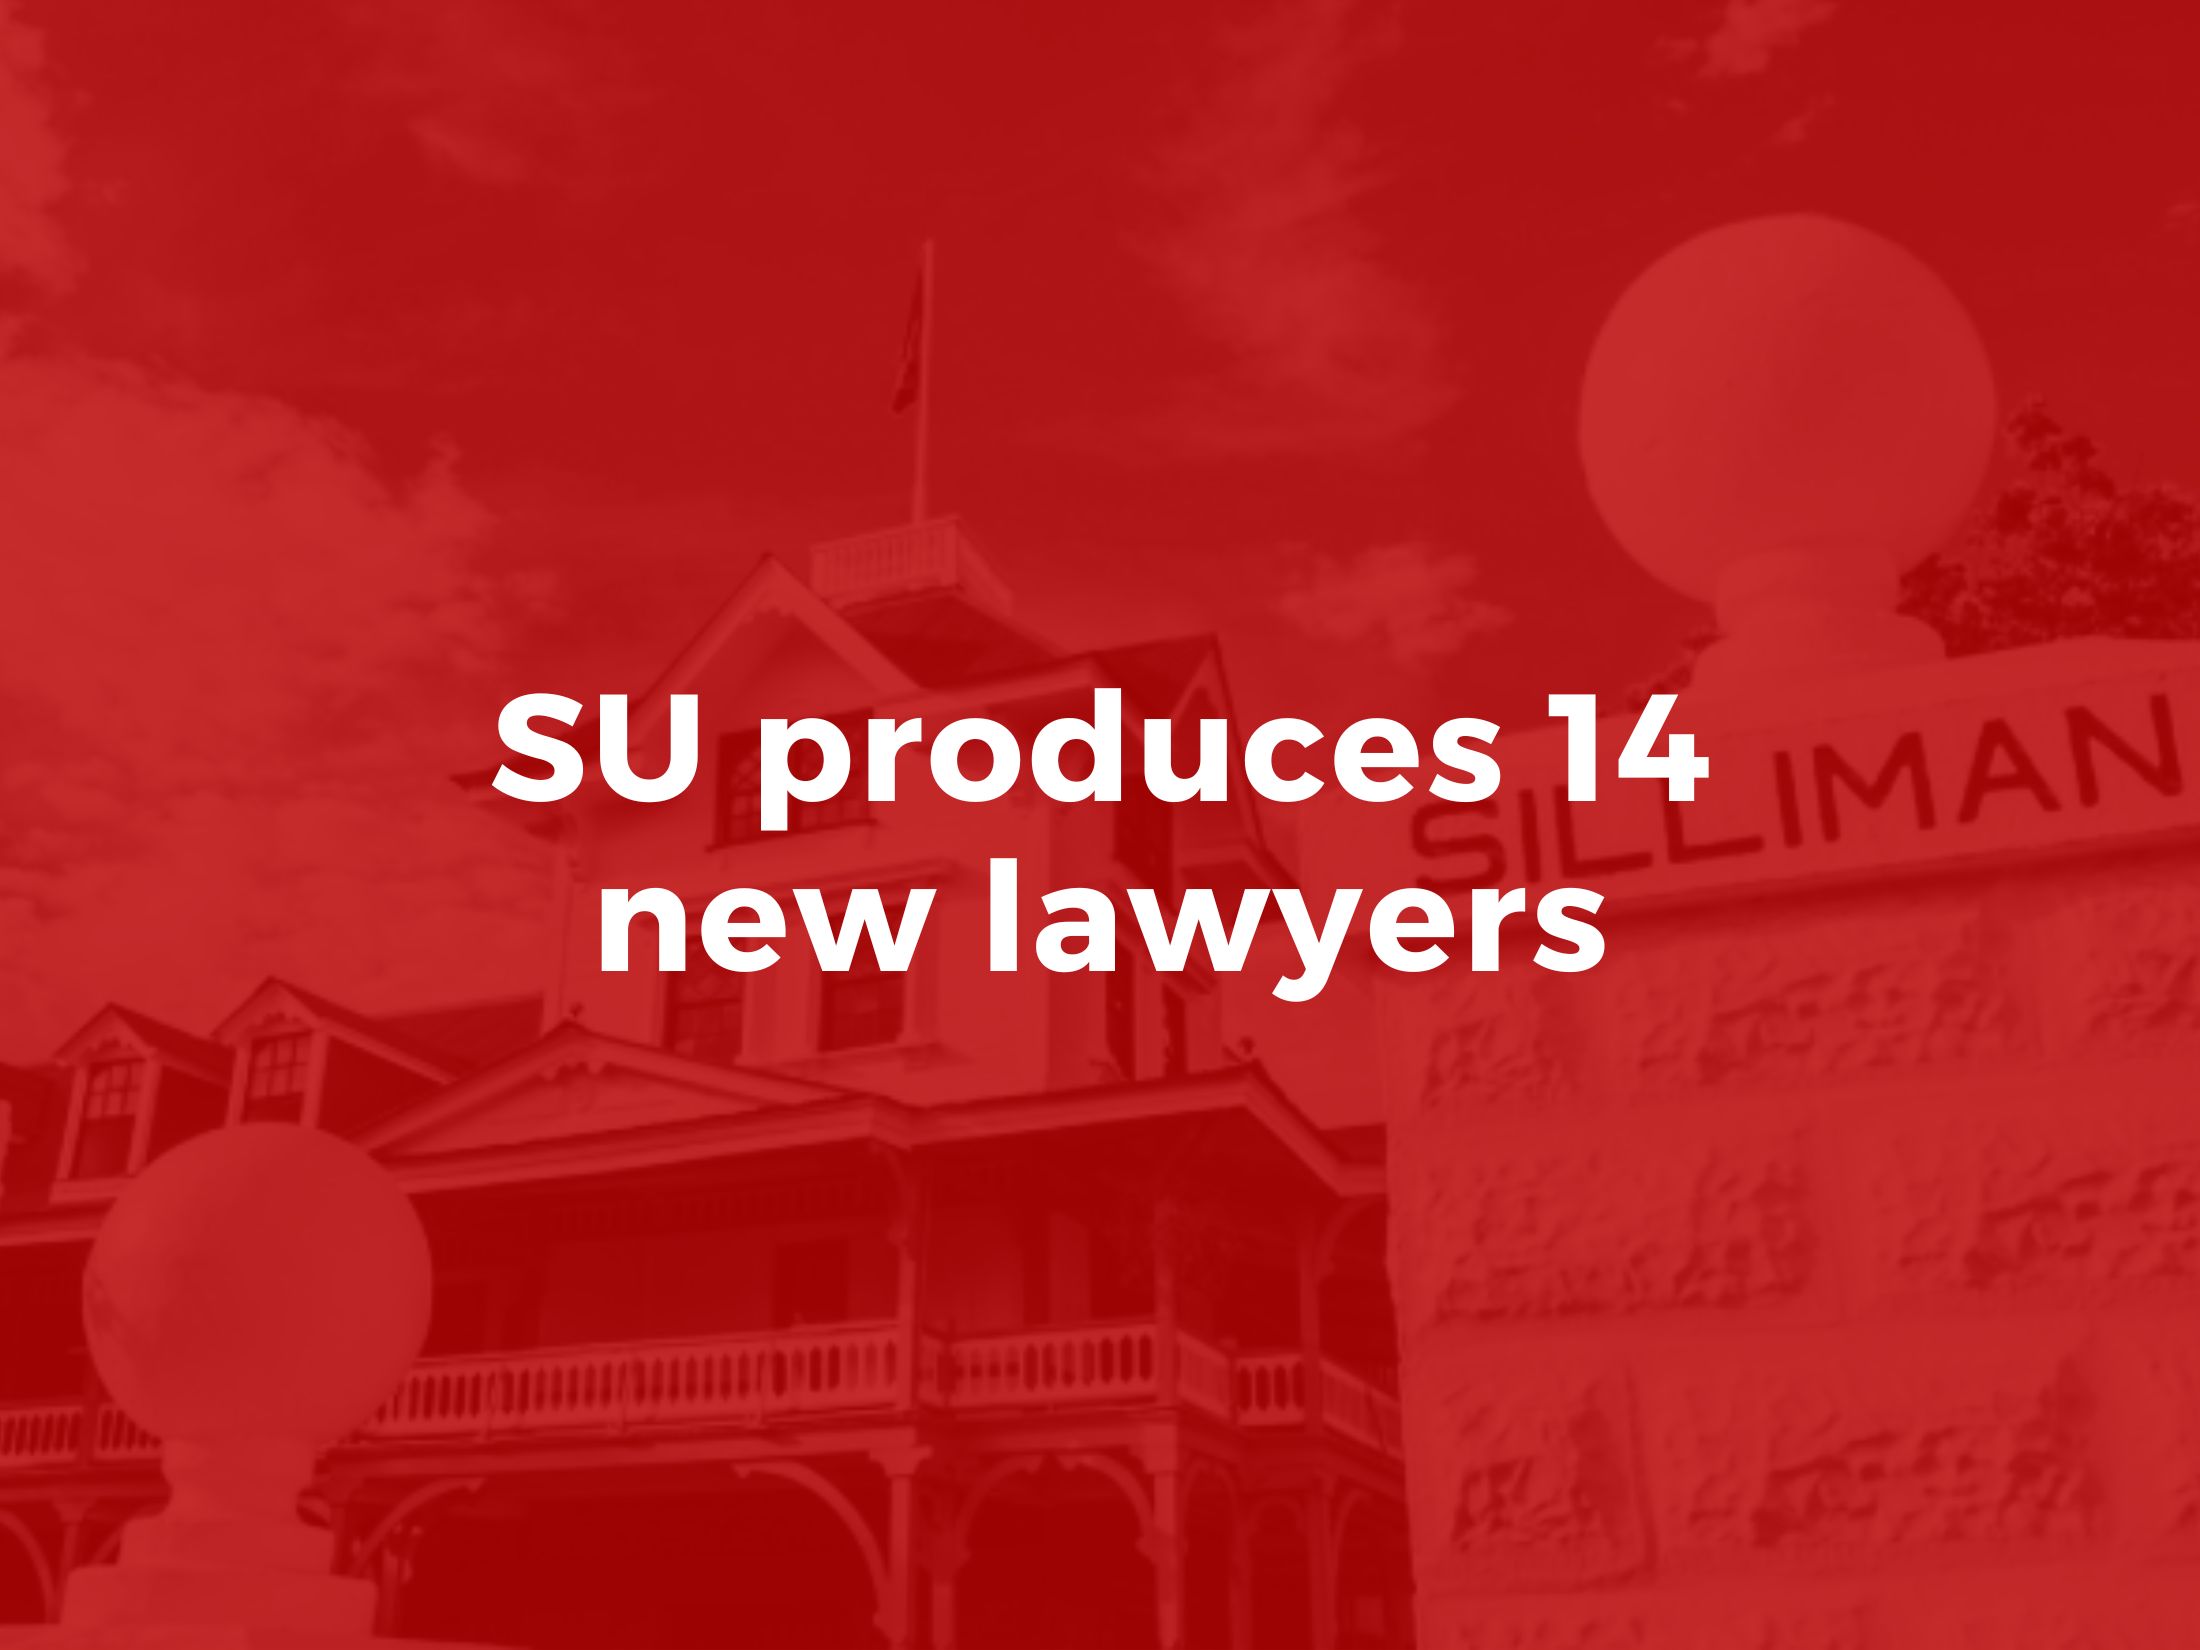 SU produces 14 new lawyers